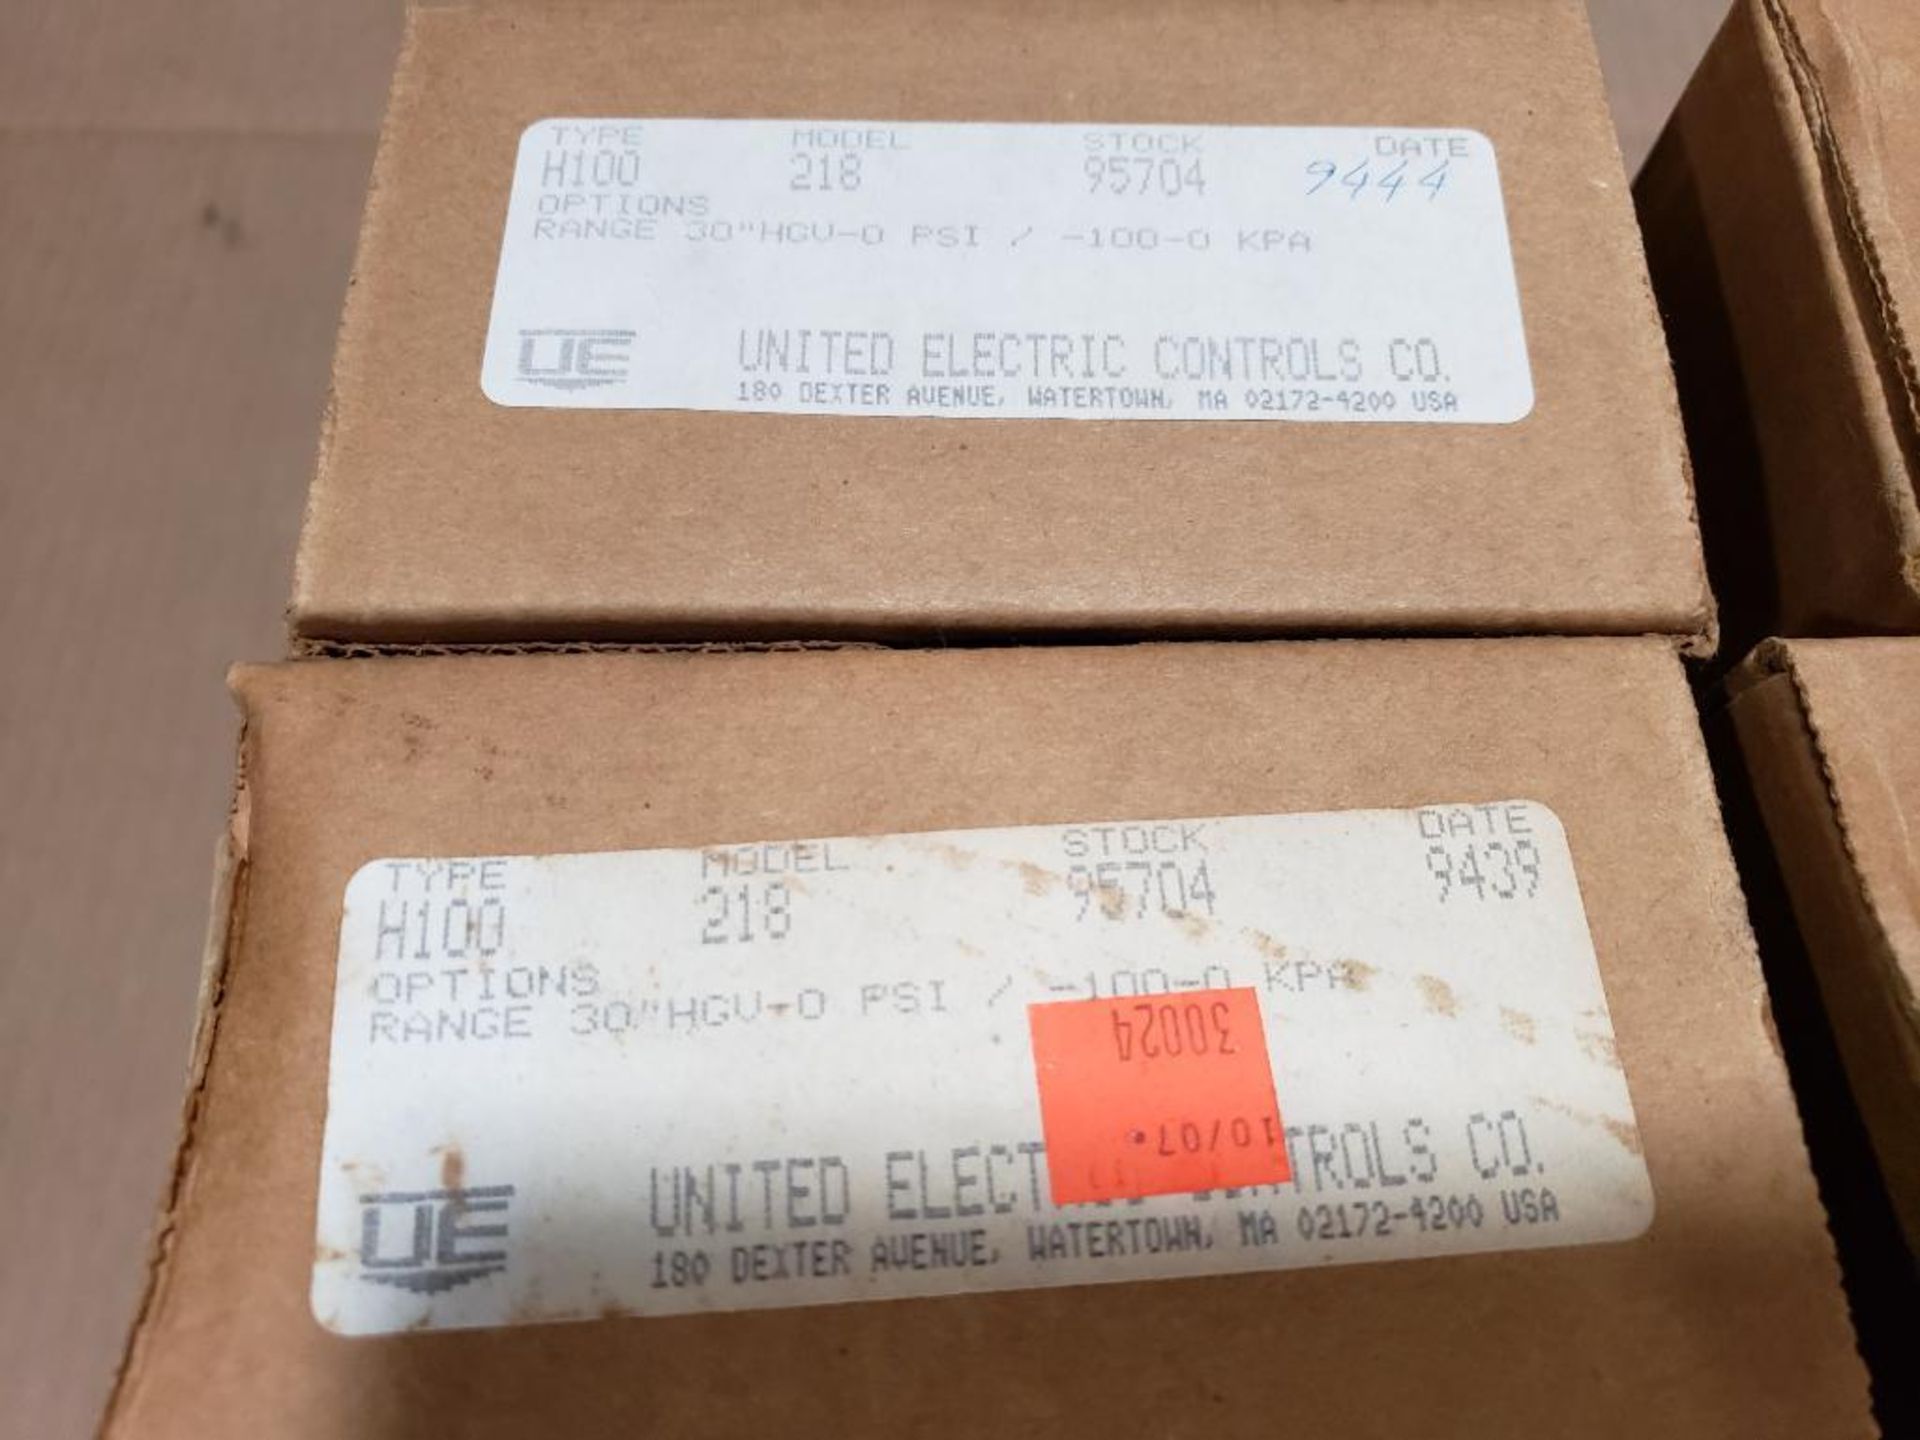 Qty 6 - UE pressure switch. Part number H100-218. - Image 4 of 6